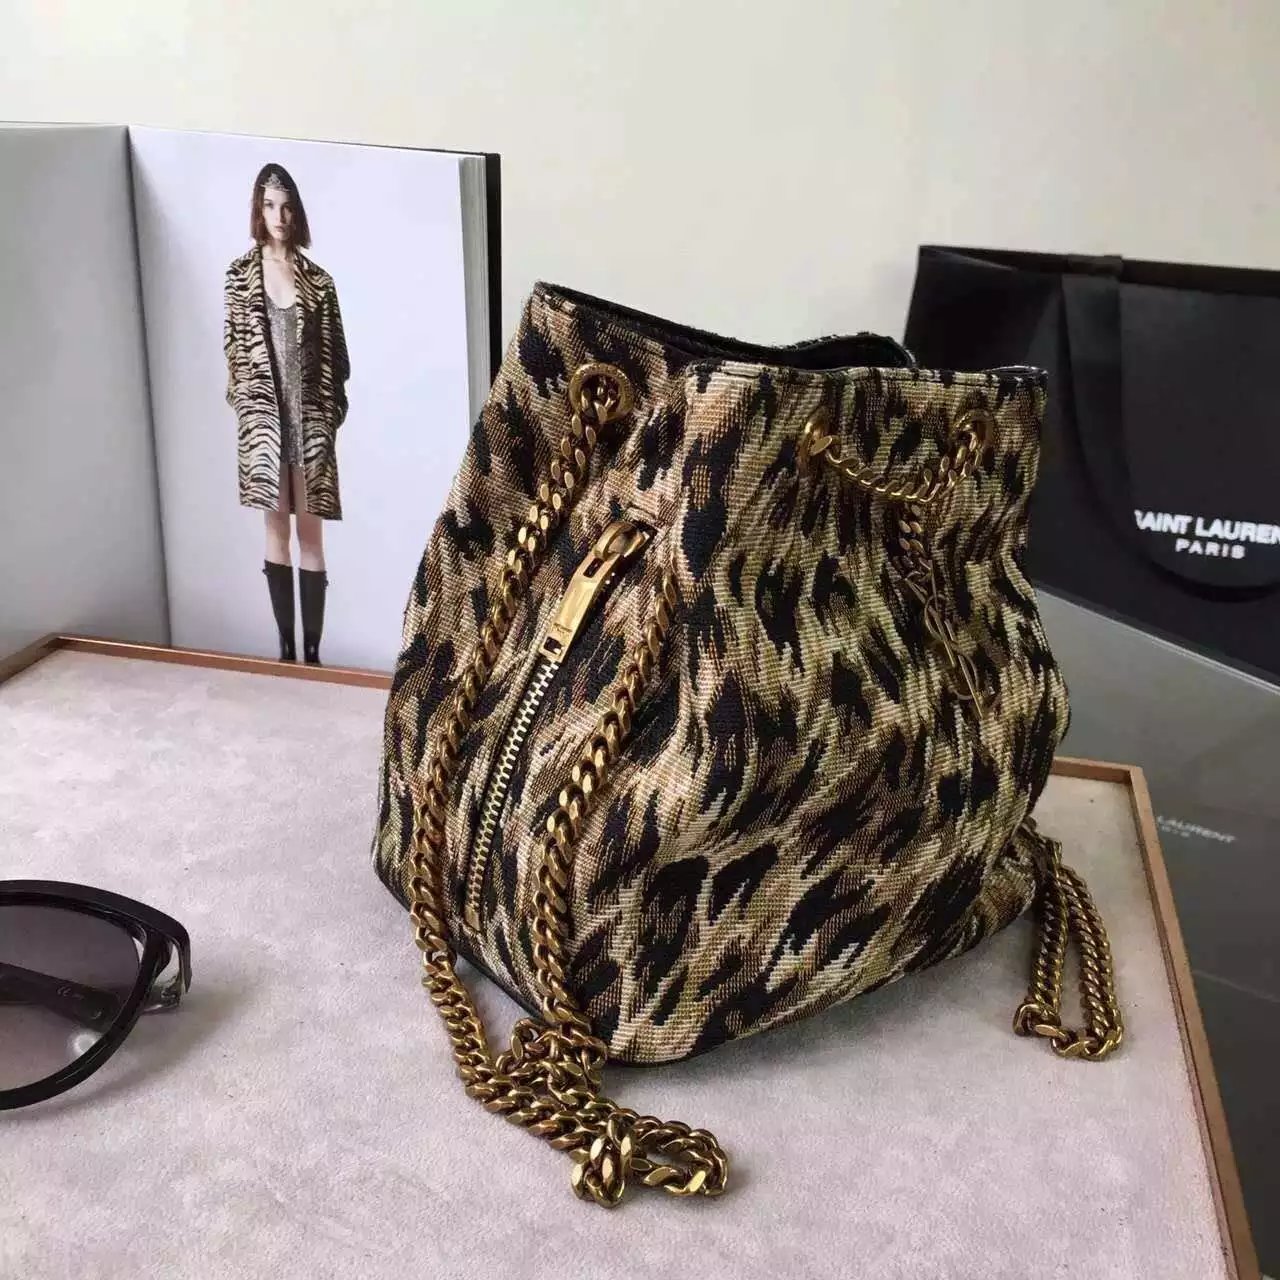 Limited Edition!2016 New Saint Laurent Bag Cheap Sale-Saint Laurent Classic Baby Emmanuelle Chain Bucket Bag in Natural and Black Leopard Woven Polyester and Cotton - Click Image to Close